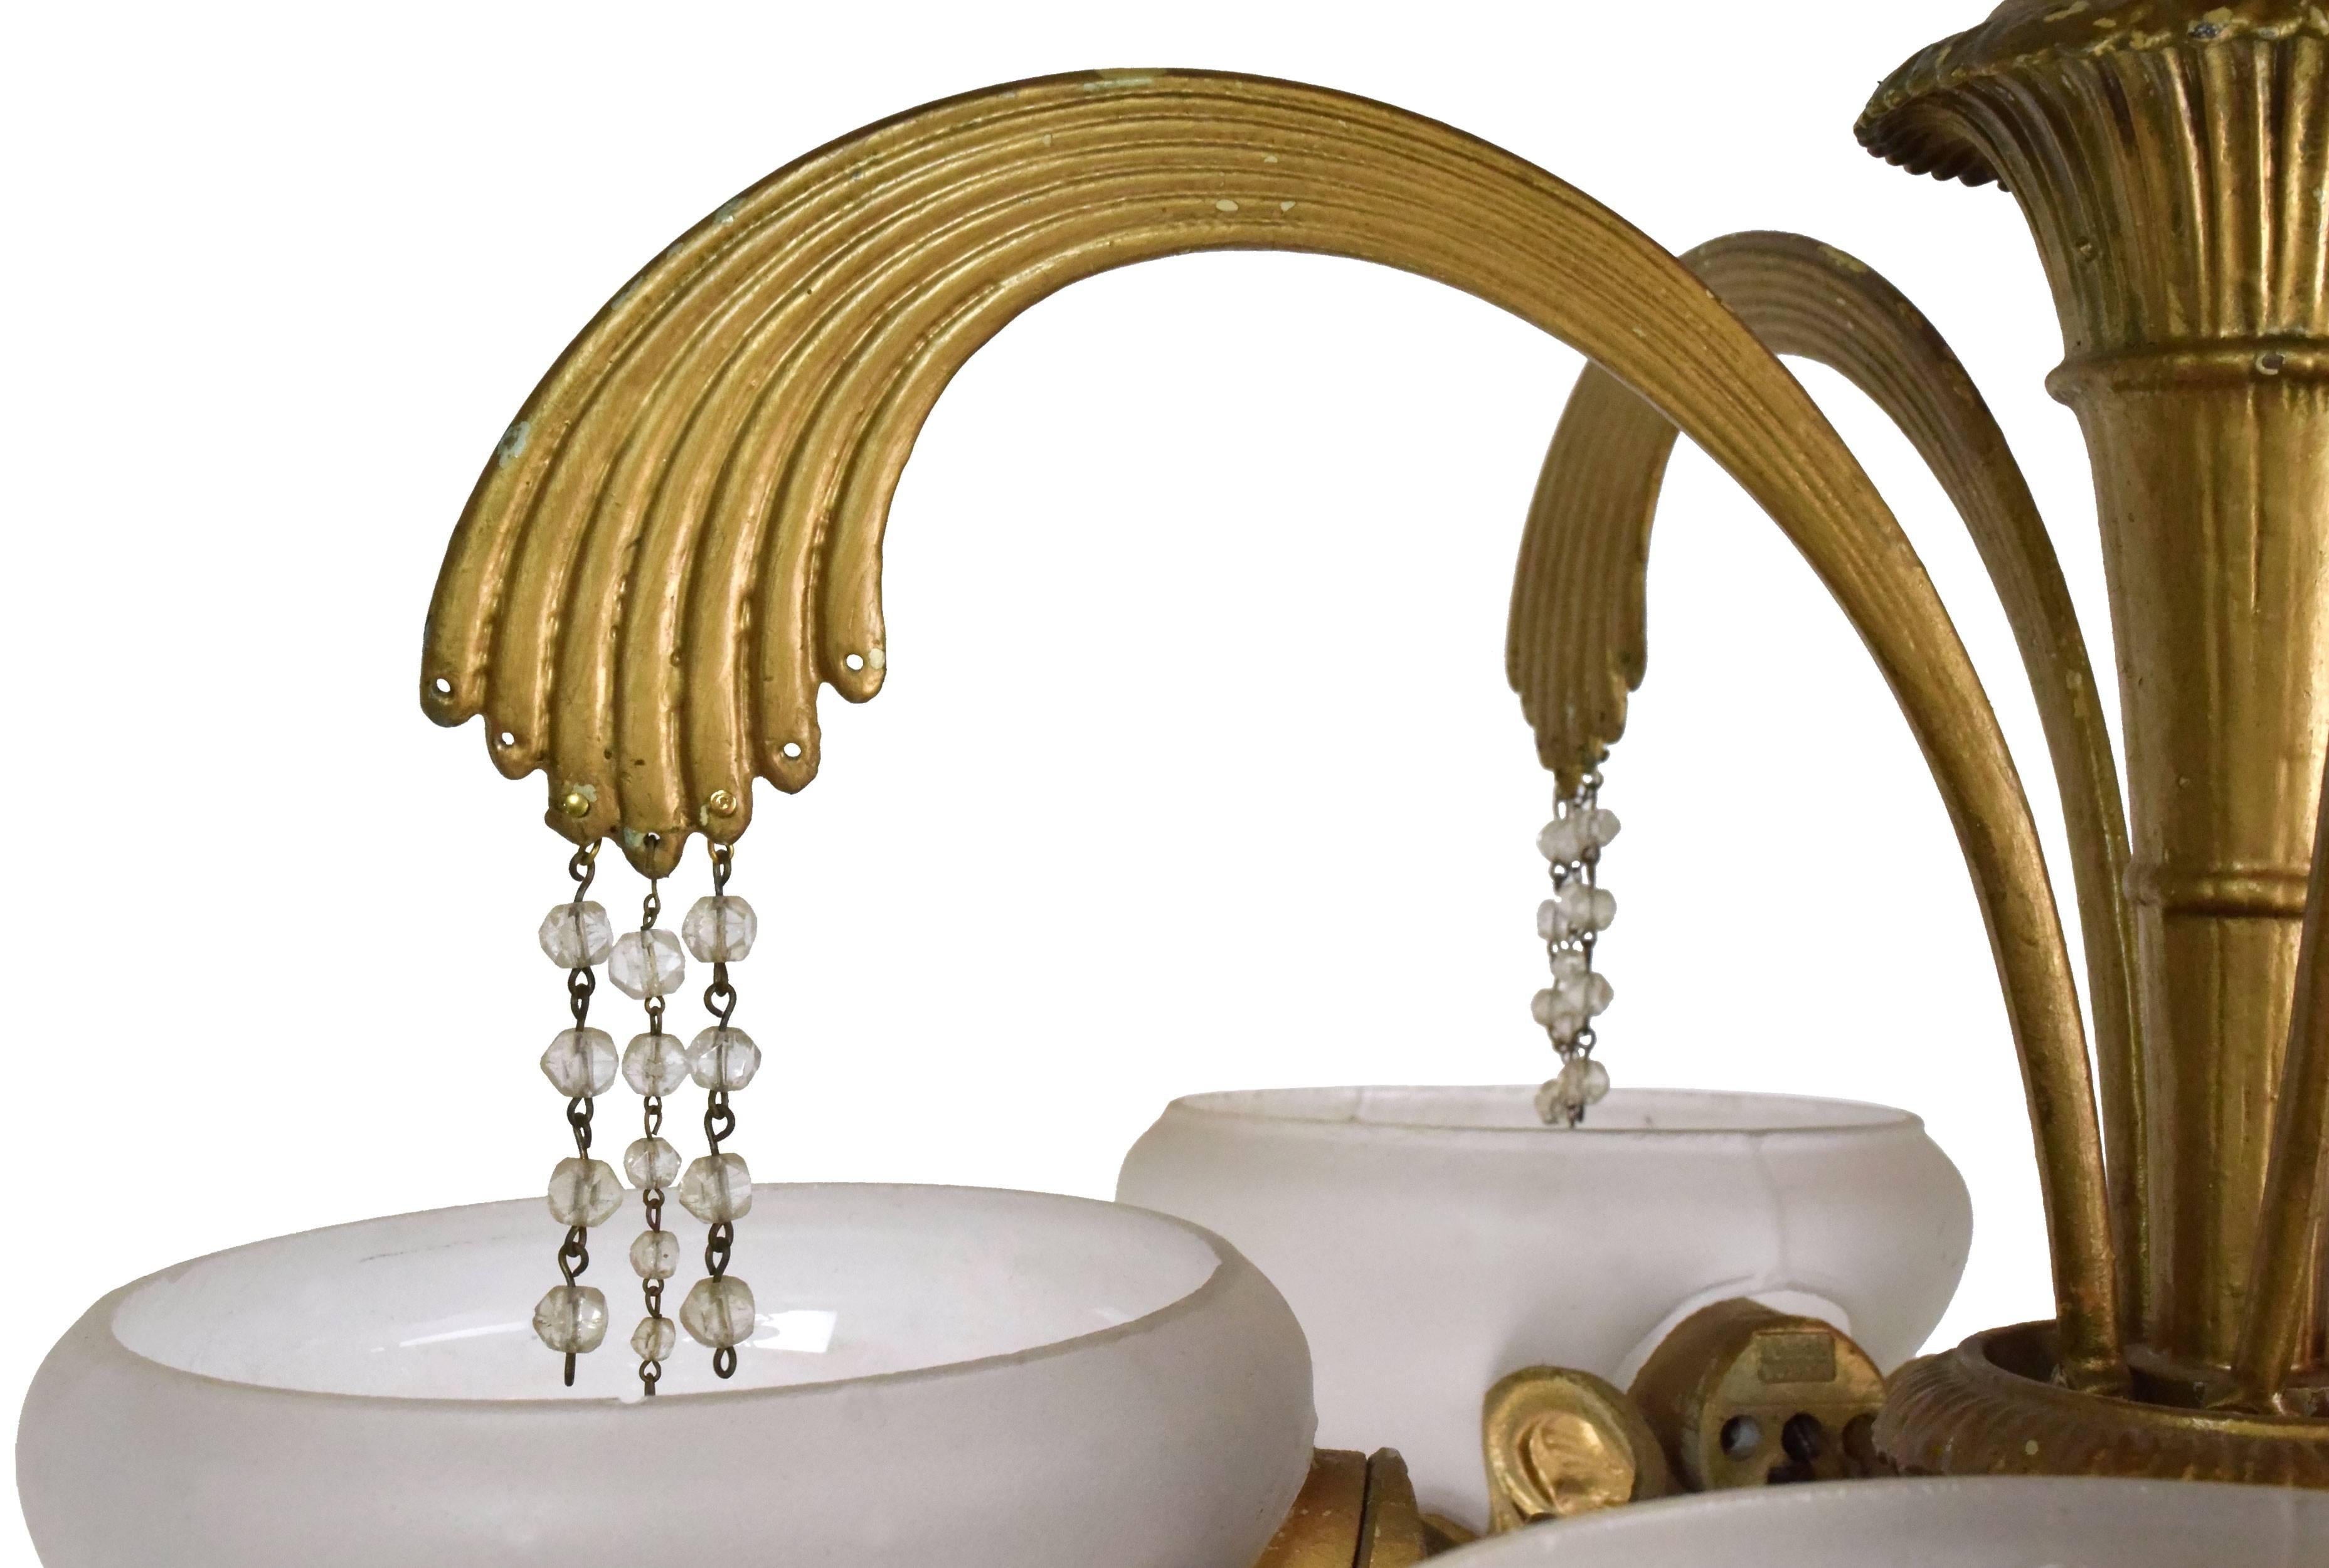 This Classic Art Deco brass chandelier features five opaque shades and gracefully curving arms. Small crystals hang into the bowls from each arm, creating a cascading, water-like effect. The bottom of the fixture is equally beautiful, where